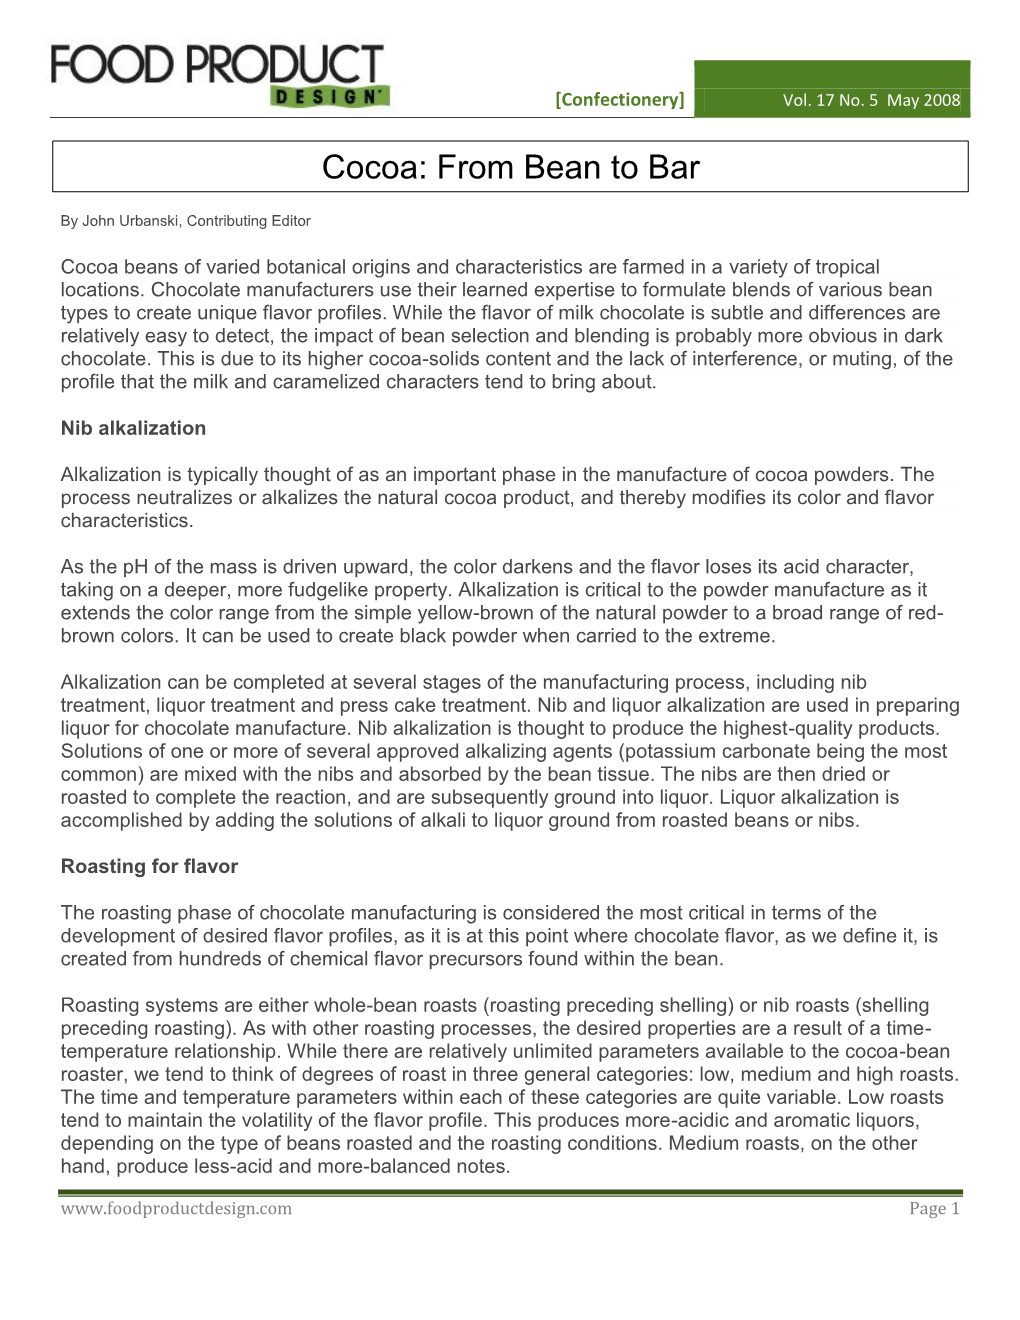 Cocoa : from Bean to Bar